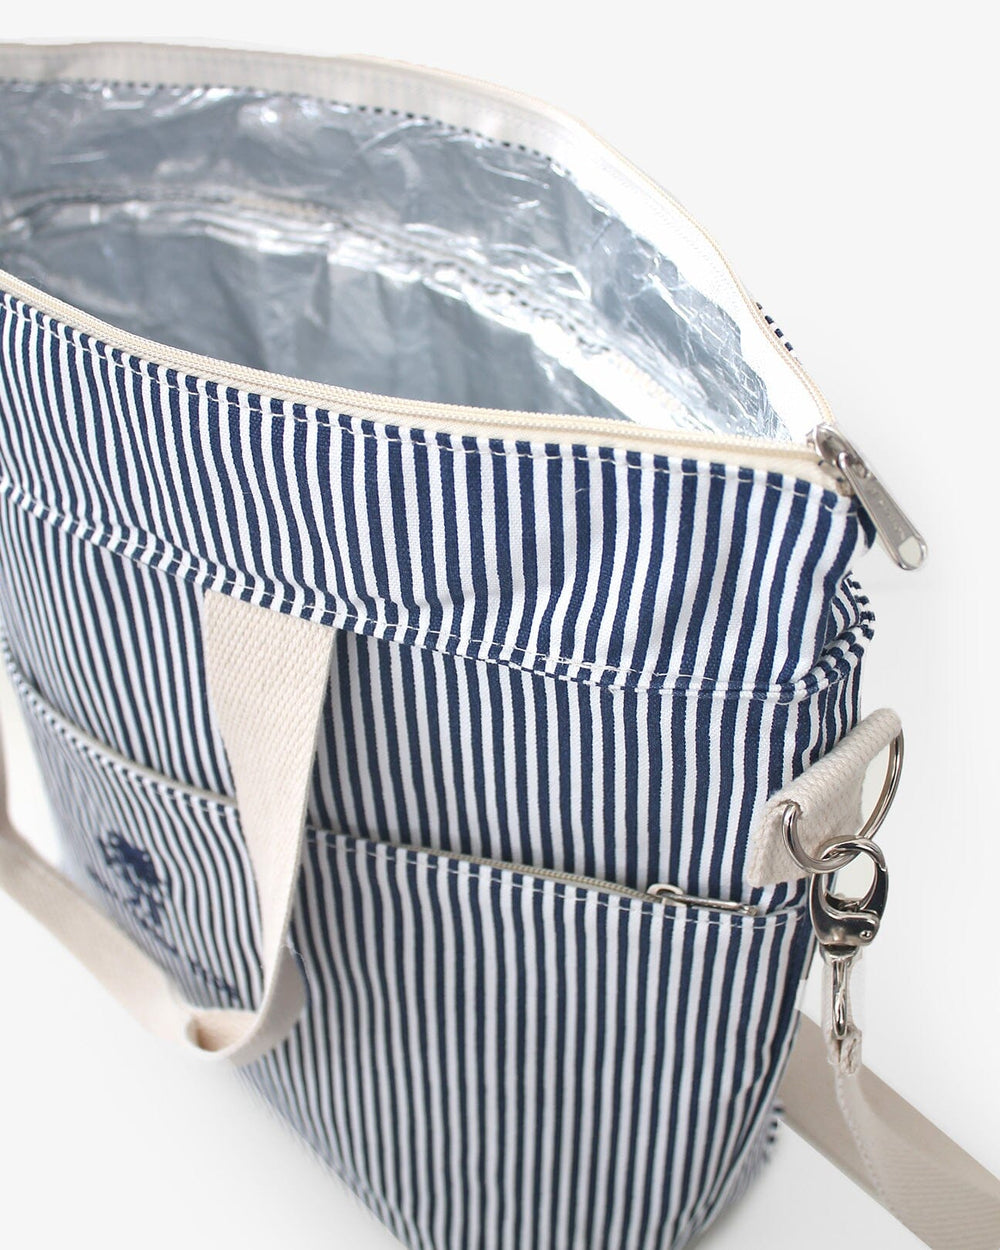 The open view of the Palm Stripes Cooler by Southern Tide - Navy